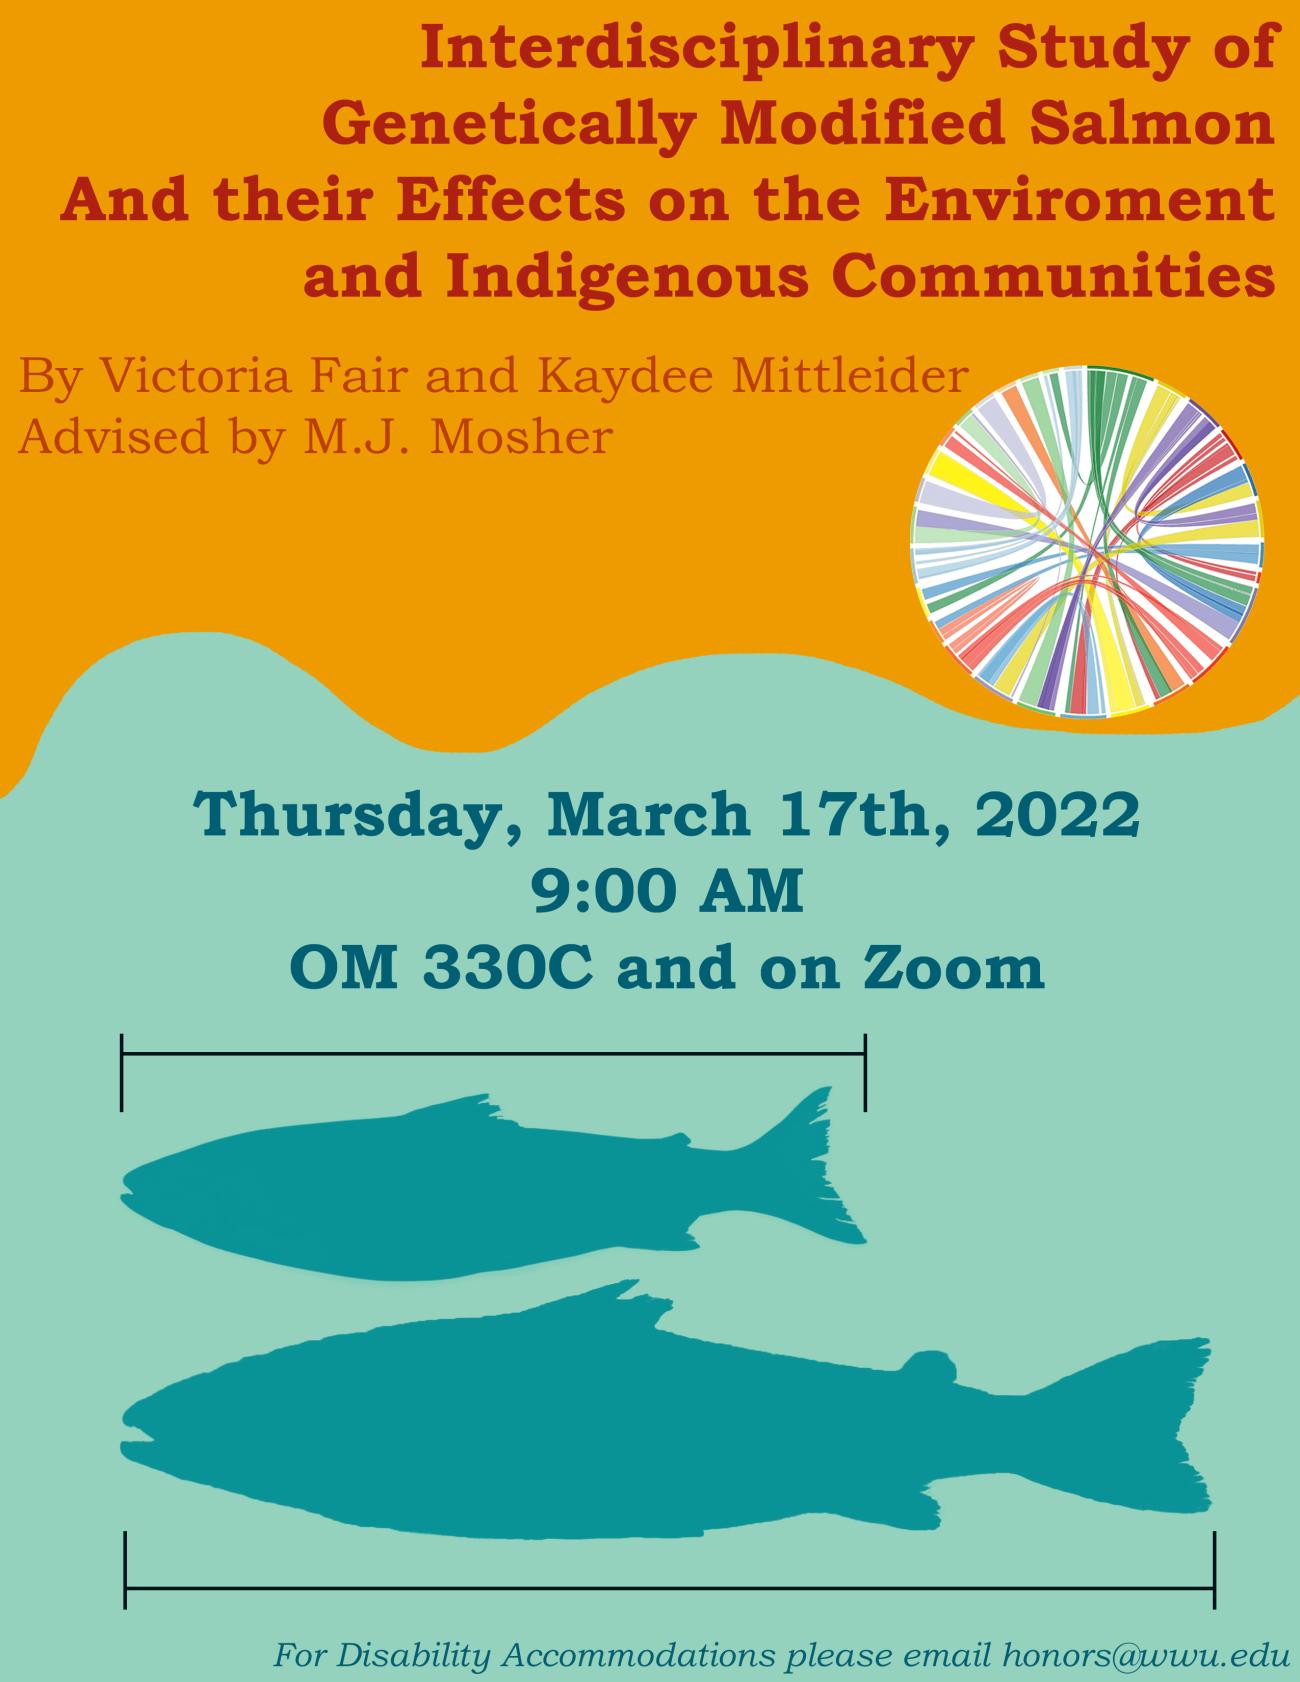 An orange and blue poster with two fish depicted of differing lengths and a genome sequencing. The text reads "Interdisciplinary Study of Genetically Modified Salmon and their Effects on the Environment and Indigenous Communities. By Victoria Fair and Kaydee Mittleider. Advised by M.J. Mosher. Thursday, March 17th, 2022. 9:00 AM. OM 330C and on Zoom. For disability accommodations, please email honors@wwu.edu"